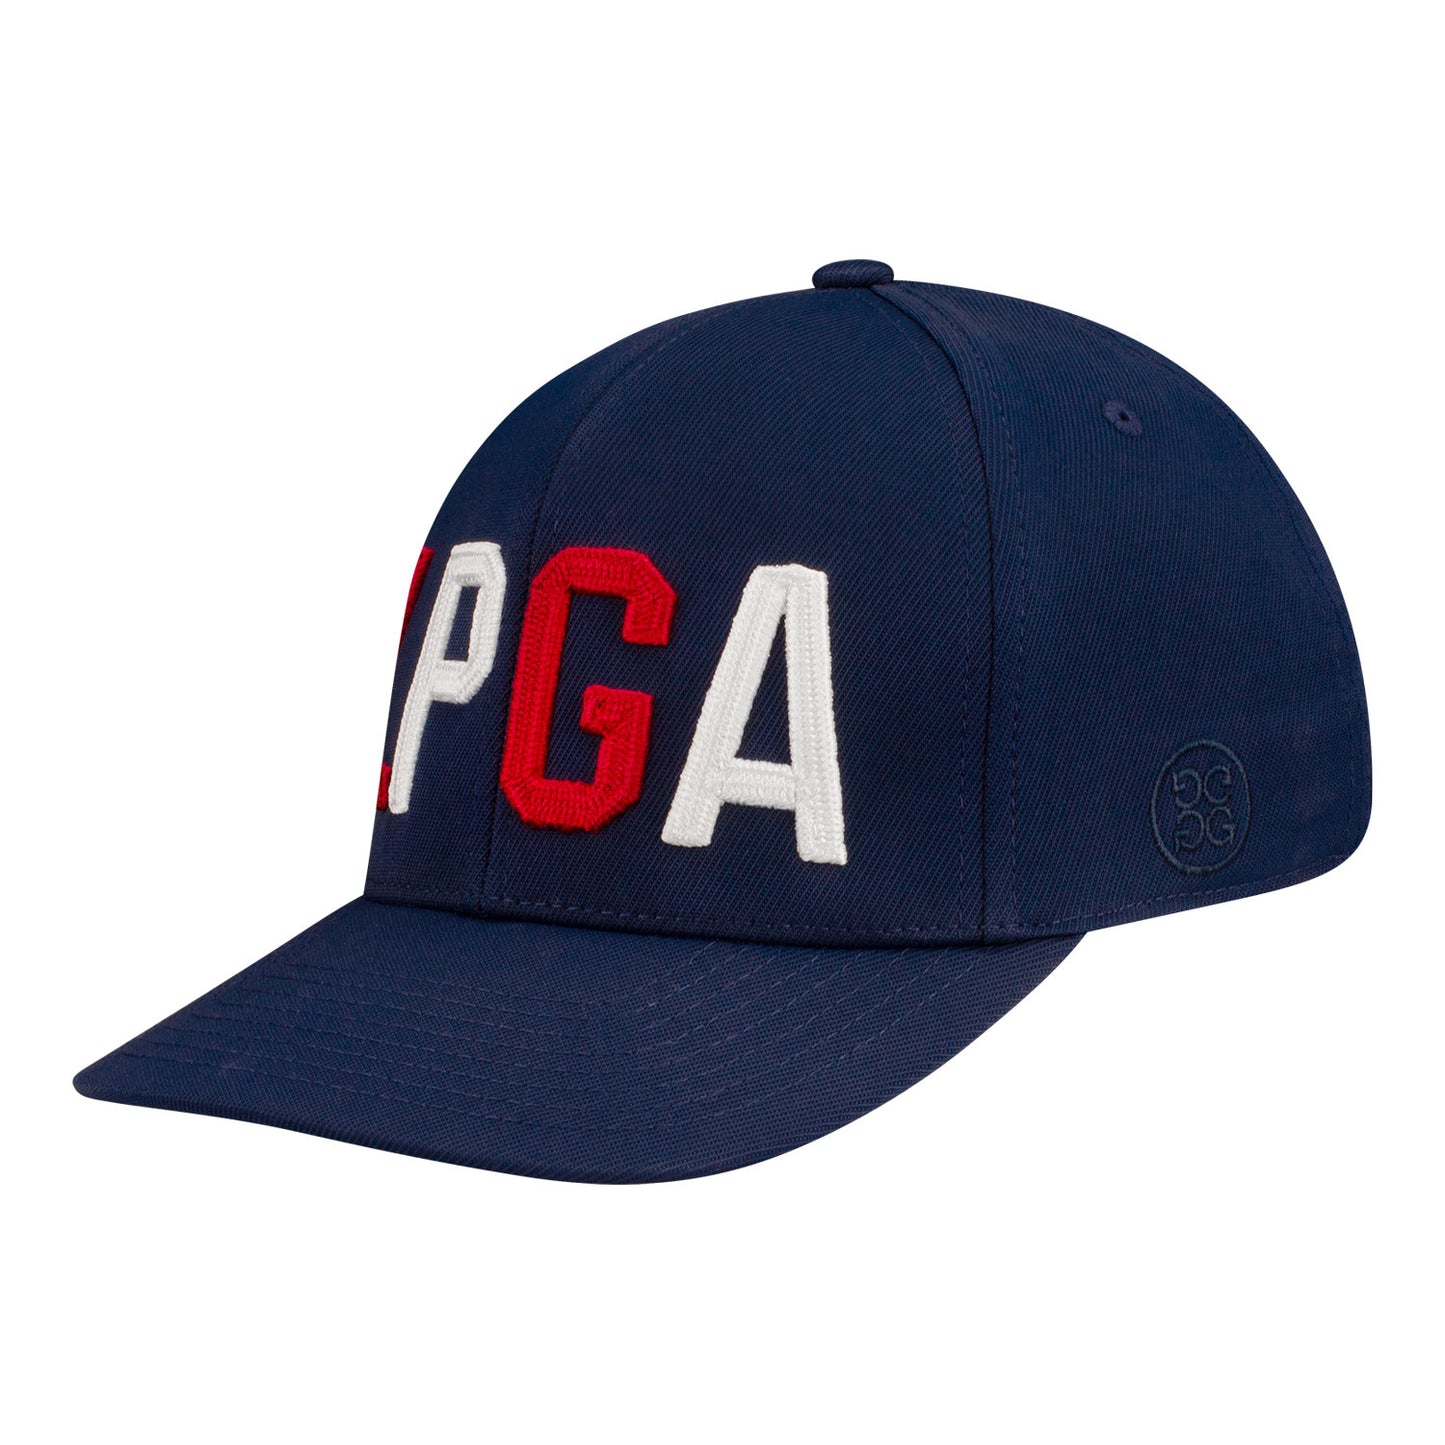 G/Fore LPGA Block Text Hat in Navy - Front Left View